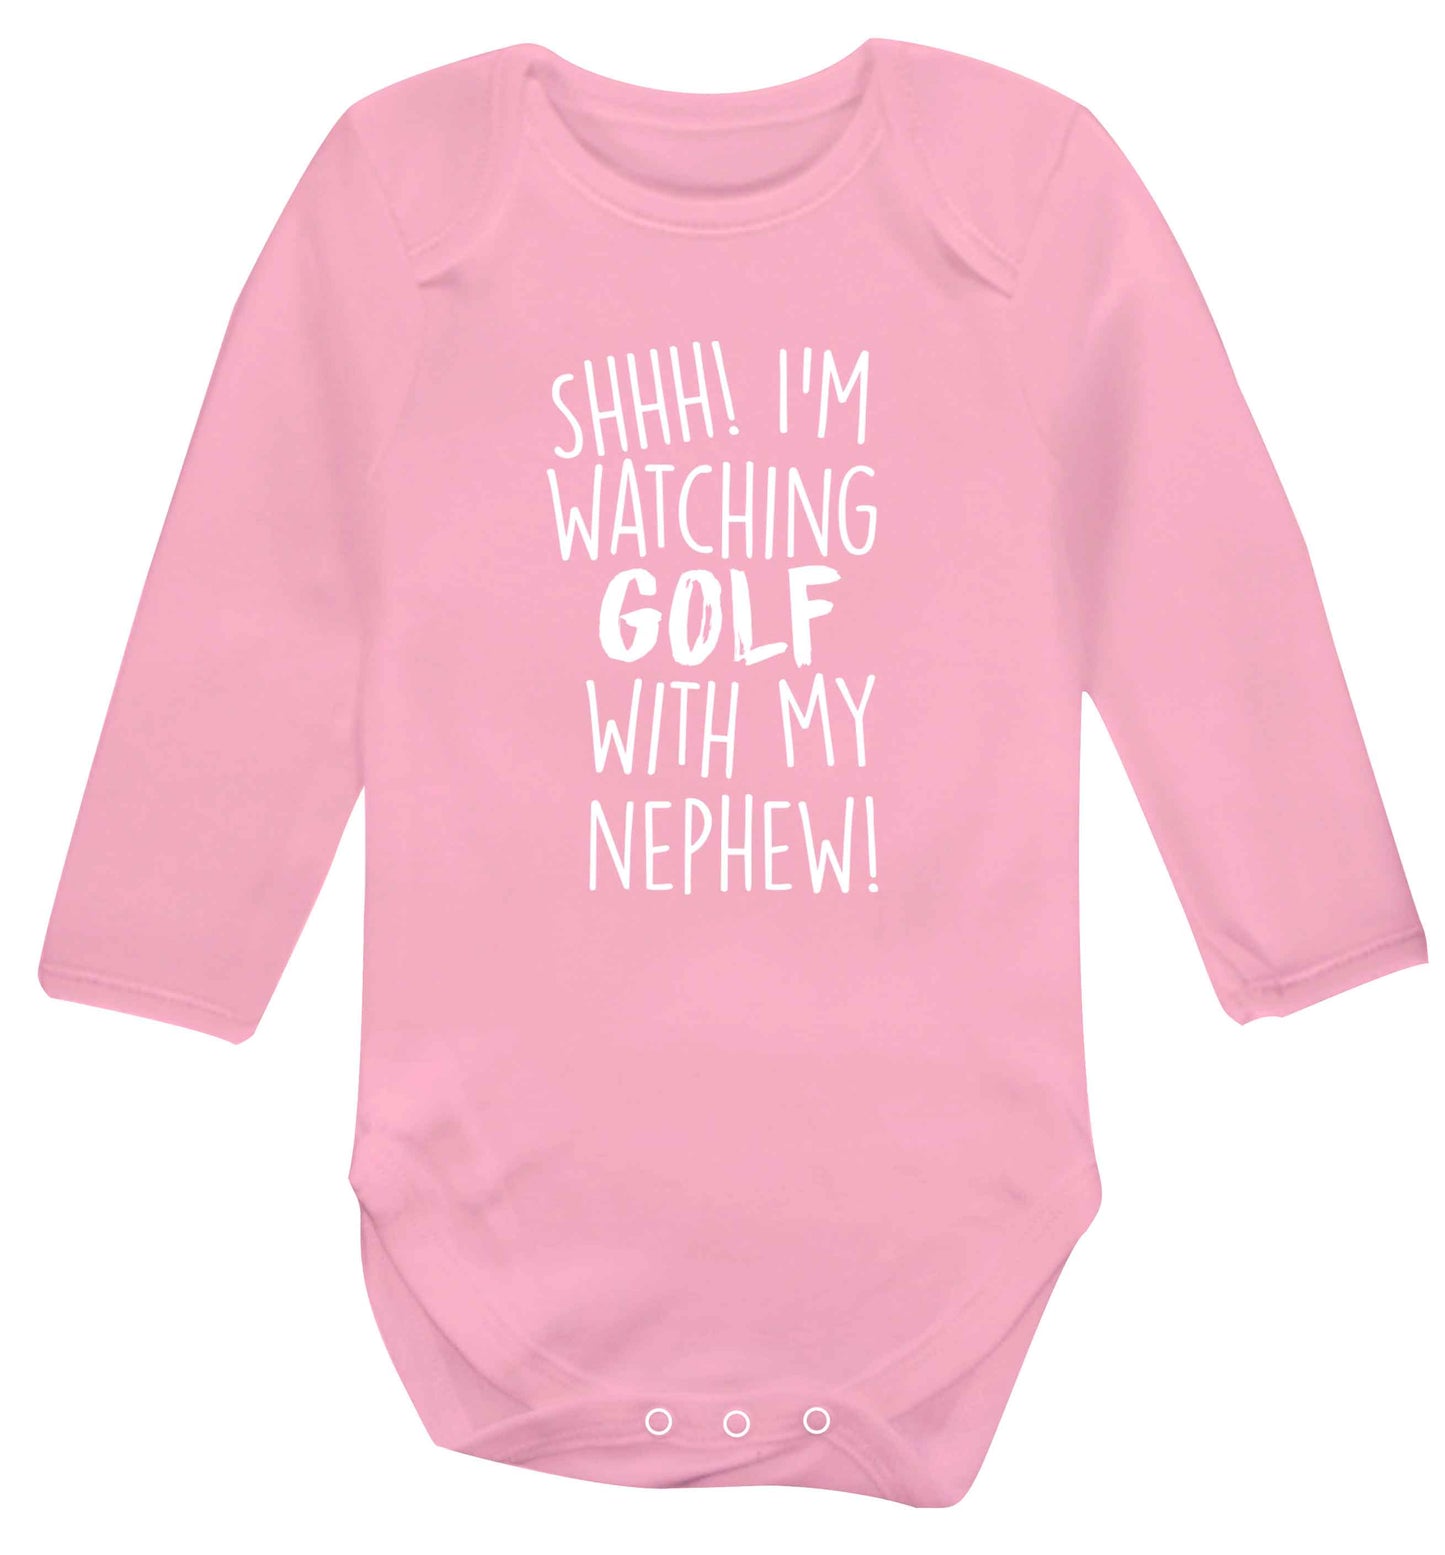 Shh I'm watching golf with my nephew Baby Vest long sleeved pale pink 6-12 months